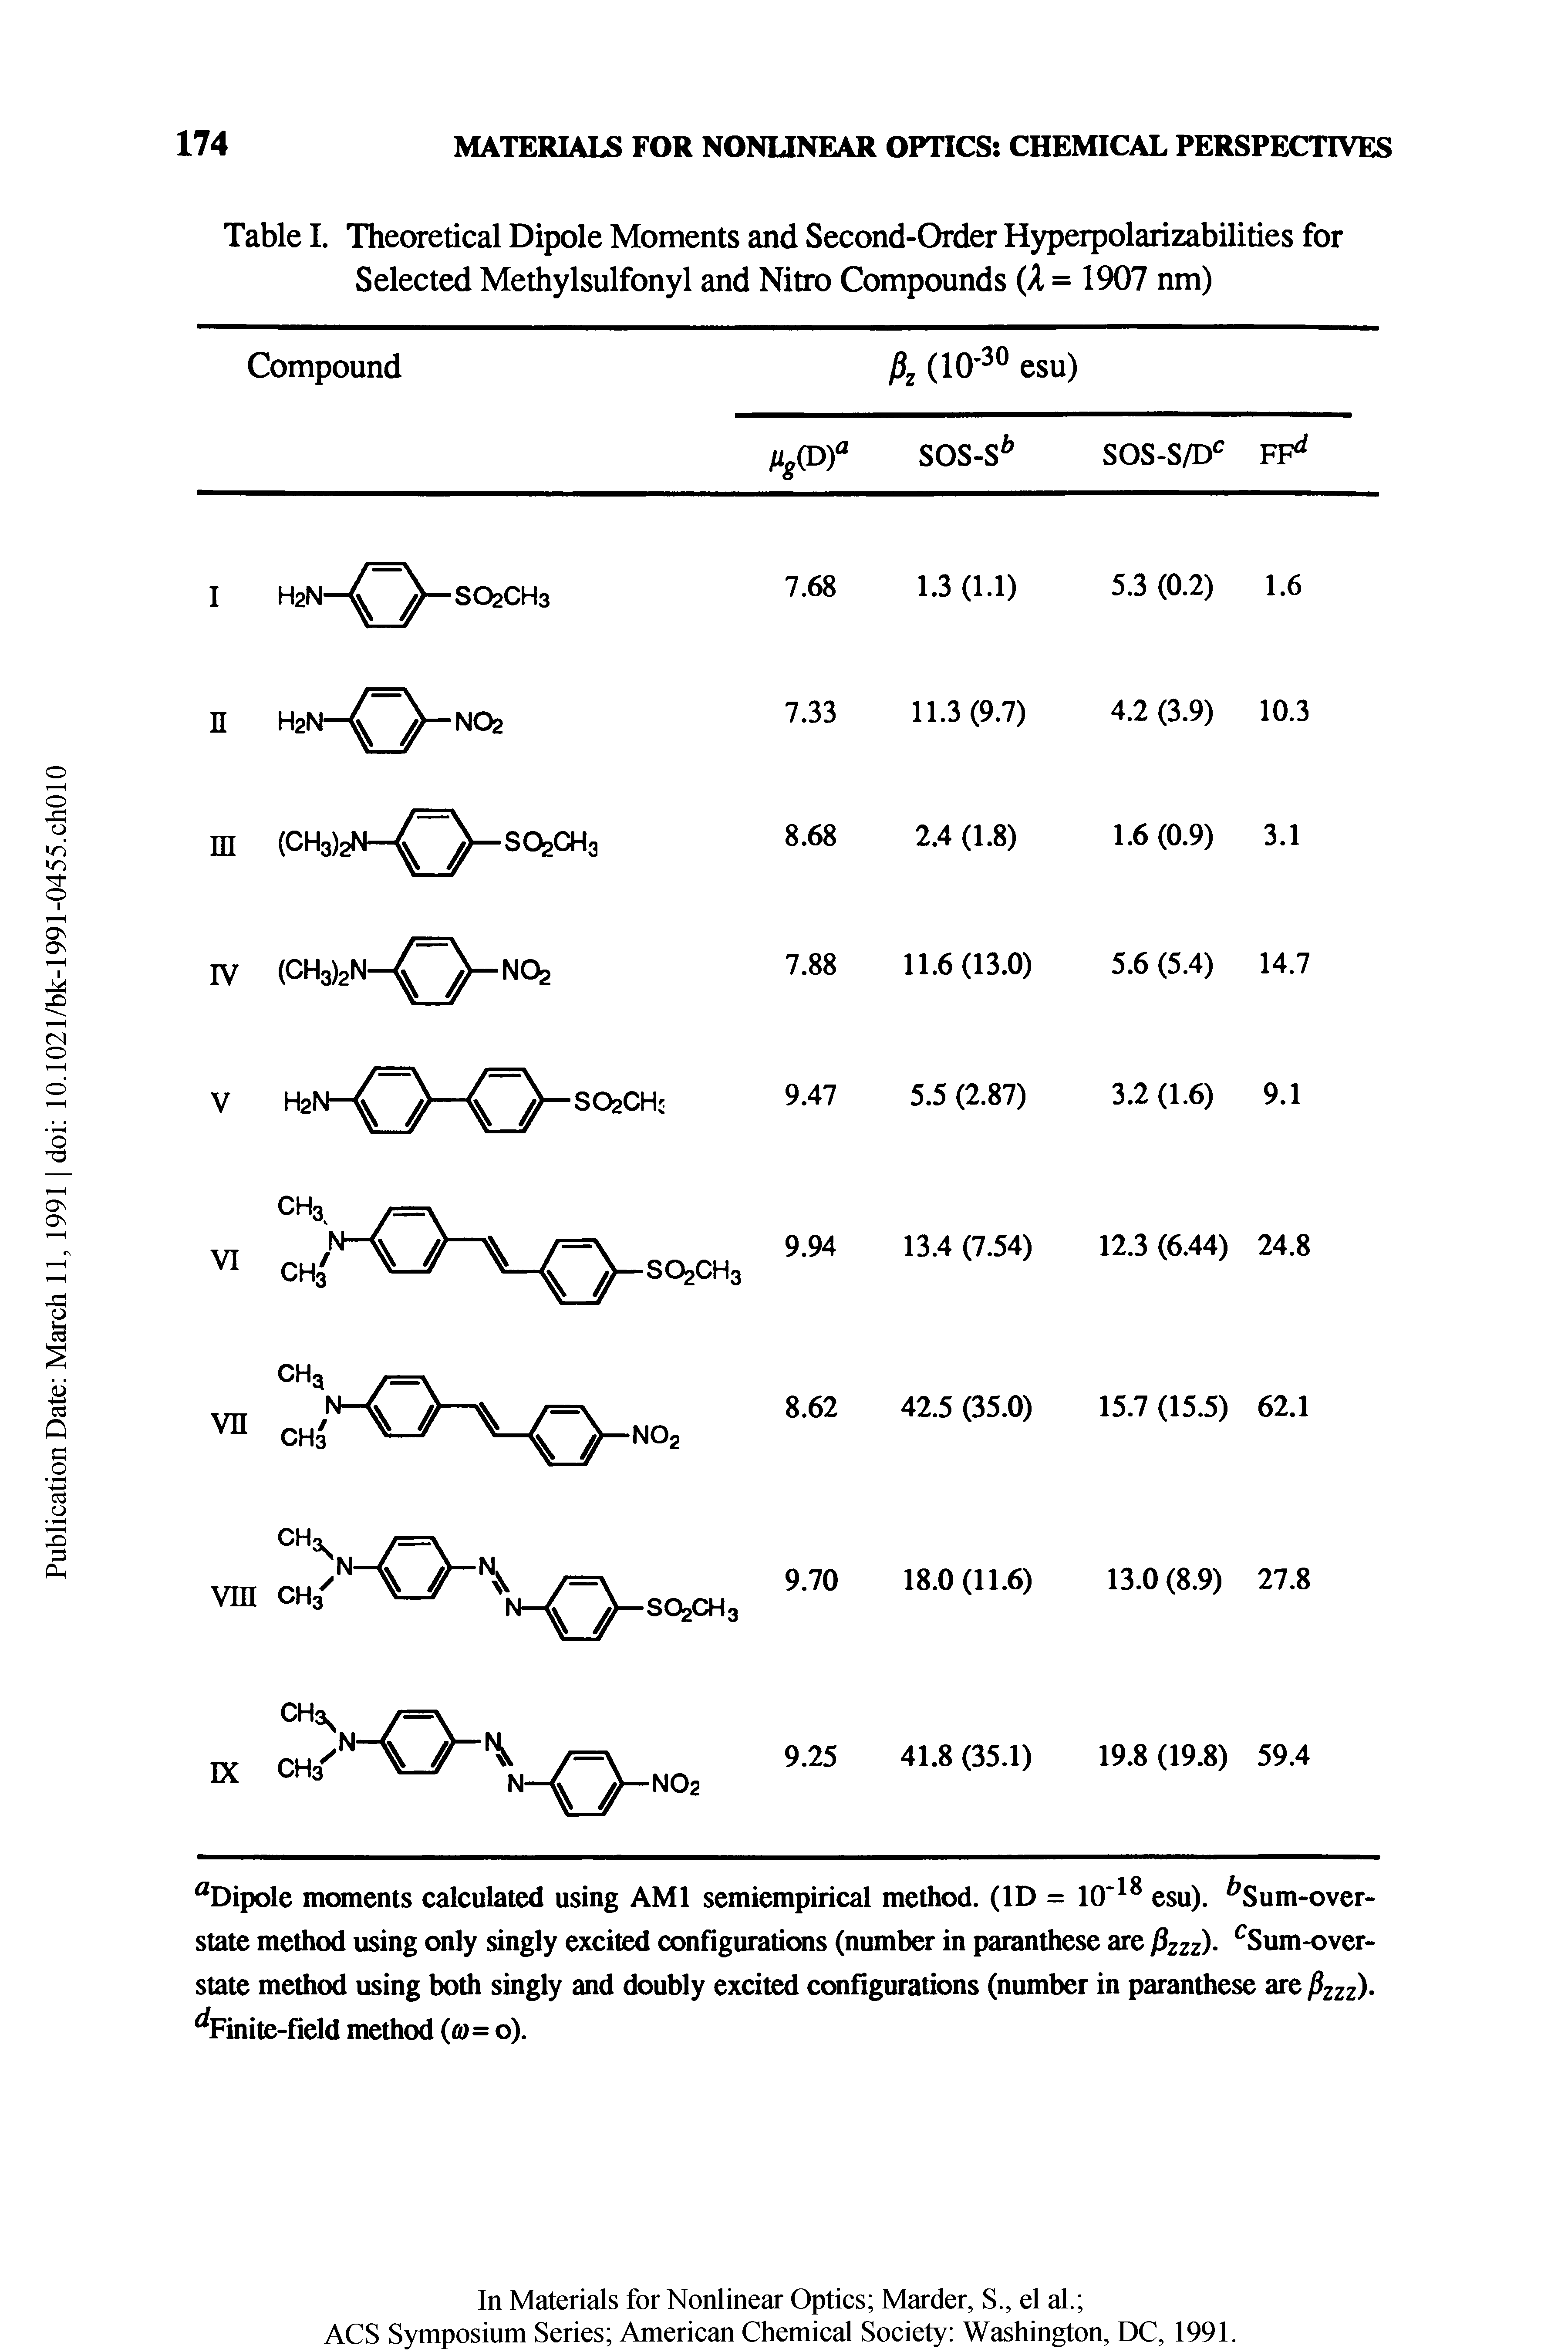 Table I. Theoretical Dipole Moments and Second-Order Hyperpolarizabilities for Selected Methylsulfonyl and Nitro Compounds (A = 1907 nm)...